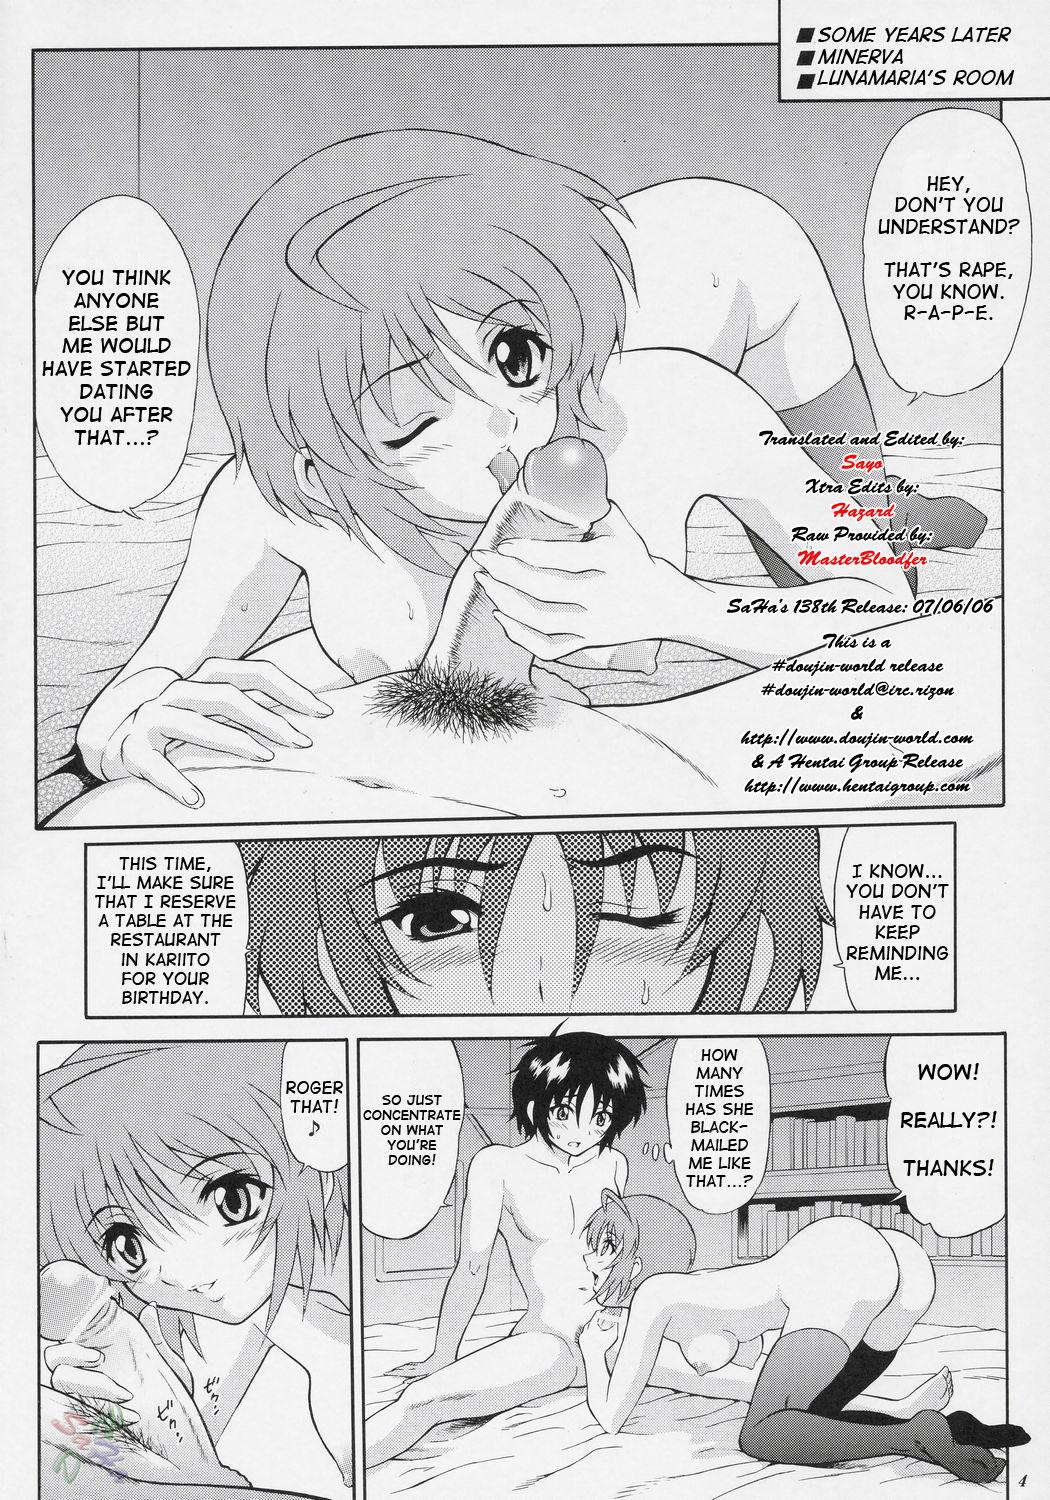 From Burning!! 2 - Gundam seed destiny Trannies - Page 3